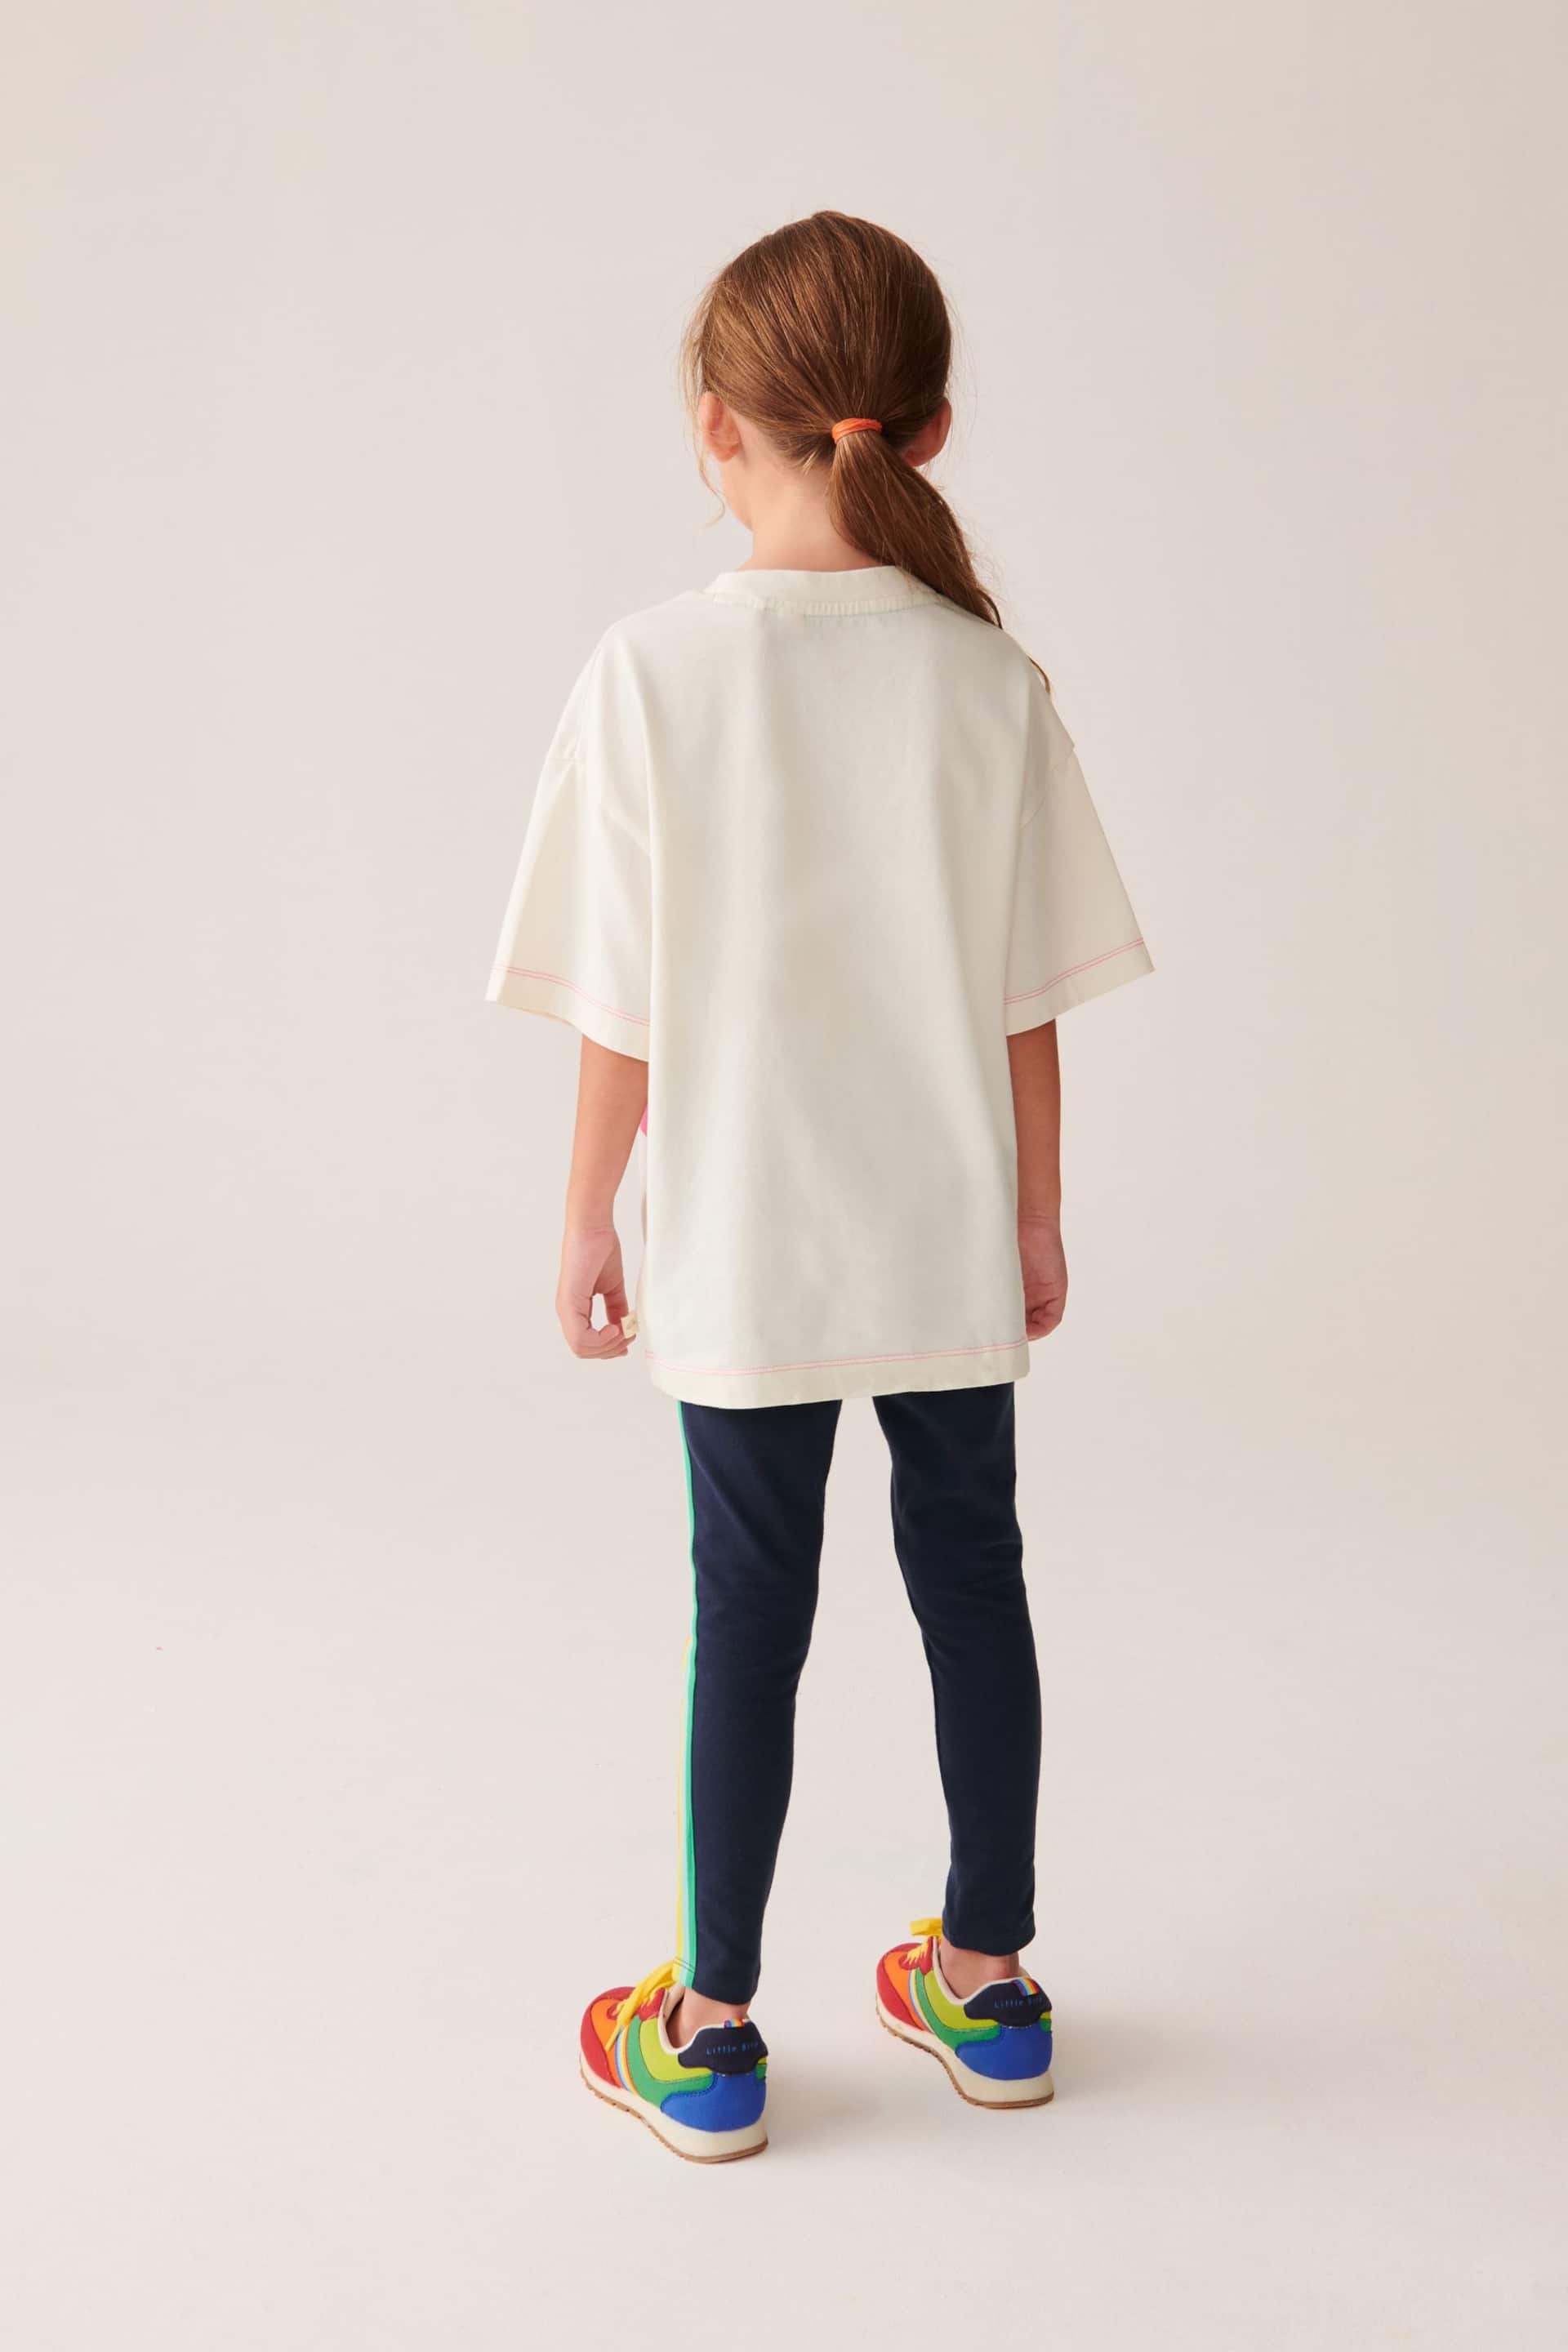 Little Bird by Jools Oliver Ecru/Navy Happy T-Shirt and Legging Set - Image 2 of 7